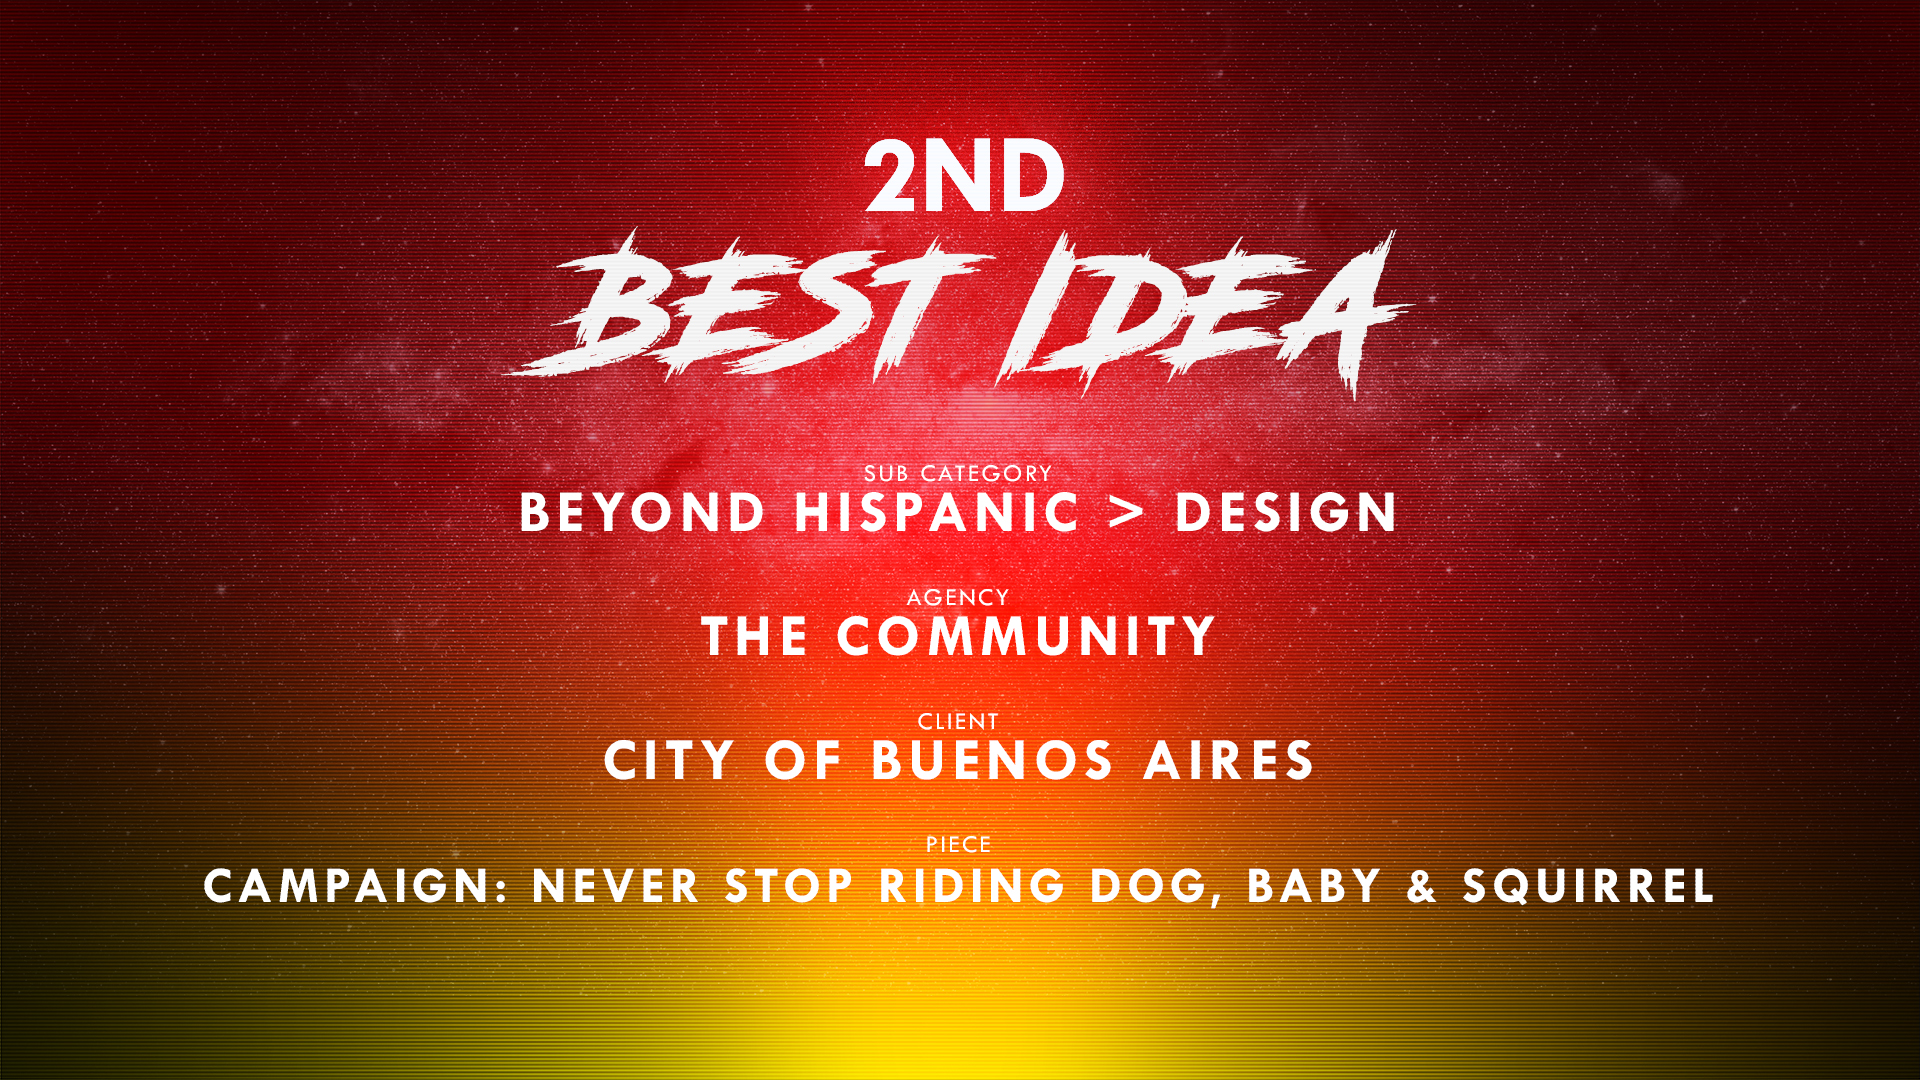 2nd - Best Idea NEVER STOP RIDING CAMPAIGN- DOG, BABY & SQUIRREL - 274, 276, 280.jpg